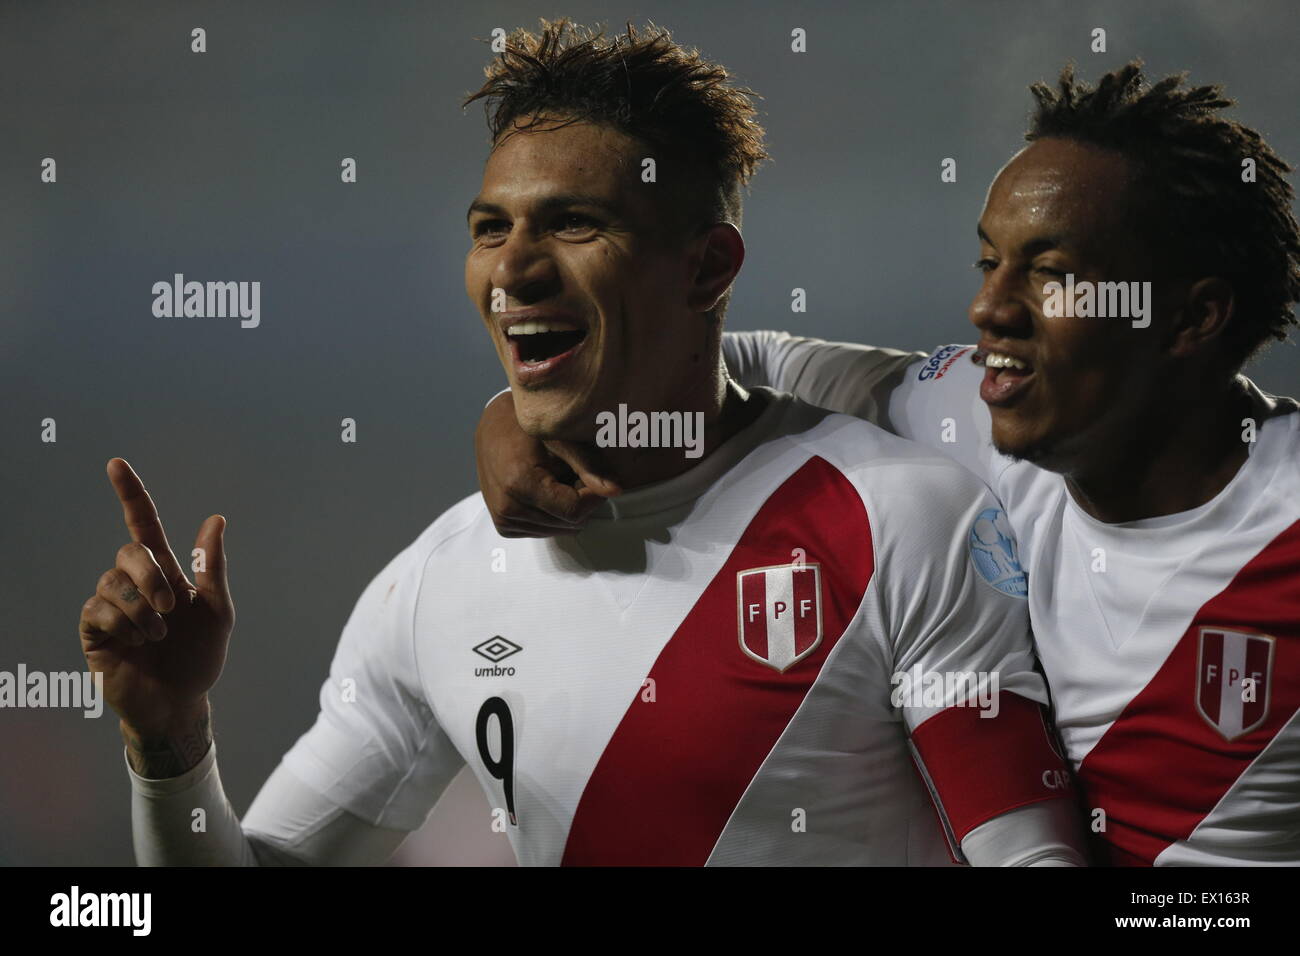 Concepcion, Chile. 3rd July, 2015. Peru's Paolo Guerrero (L) celebrates his score with his teammate Andre Carrillo (R) during the match for the Third Place of the America Cup Chile 2015, against Paraguay, held in the Municipal Stadium 'Alcaldesa Ester Roa Rebolledo', in Concepcion, Chile, on July 3, 2015. Peru won 2-0. Credit:  Jorge Villegas/Xinhua/Alamy Live News Stock Photo